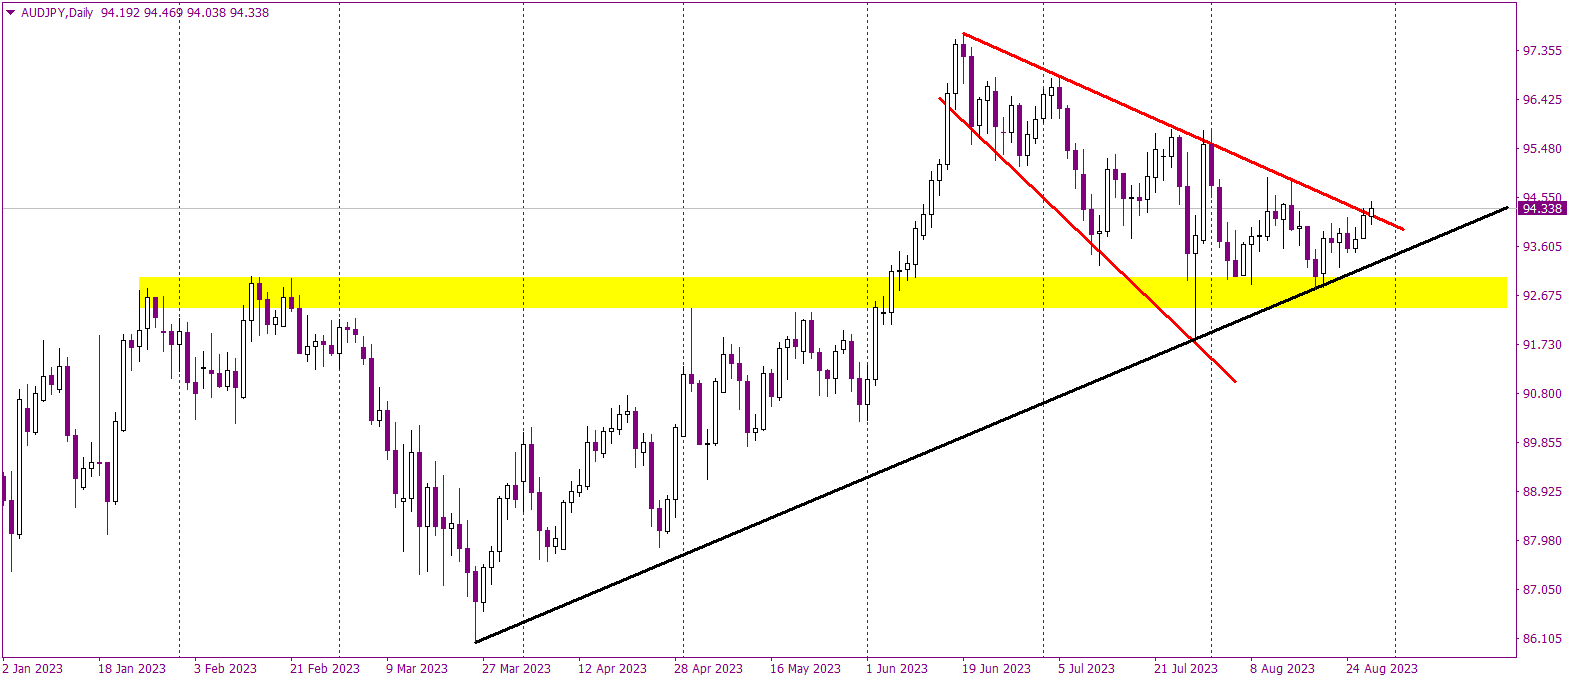 AUDJPY: Breaking Free from the Wedge and Aiming for Monthly Highs